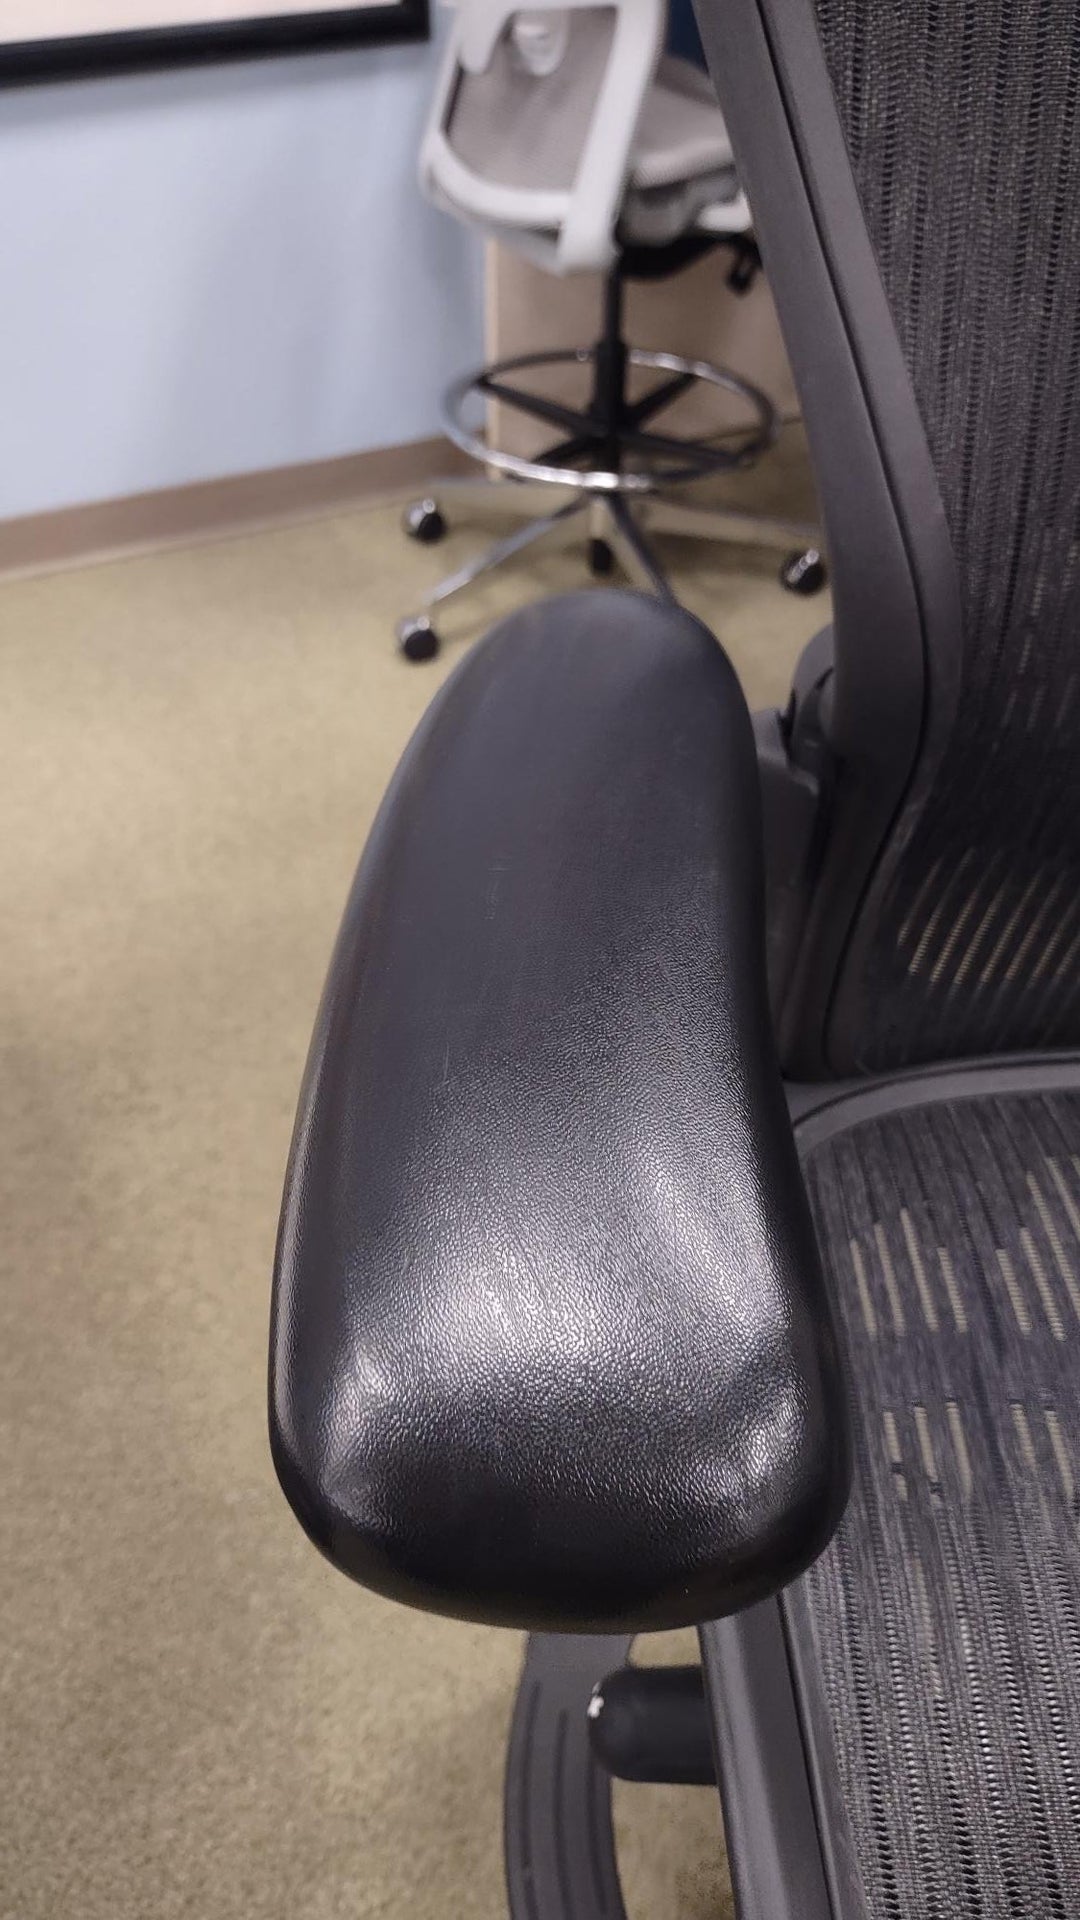 USED Herman Miller Aeron Black Stool Chair - close up view of arm rest